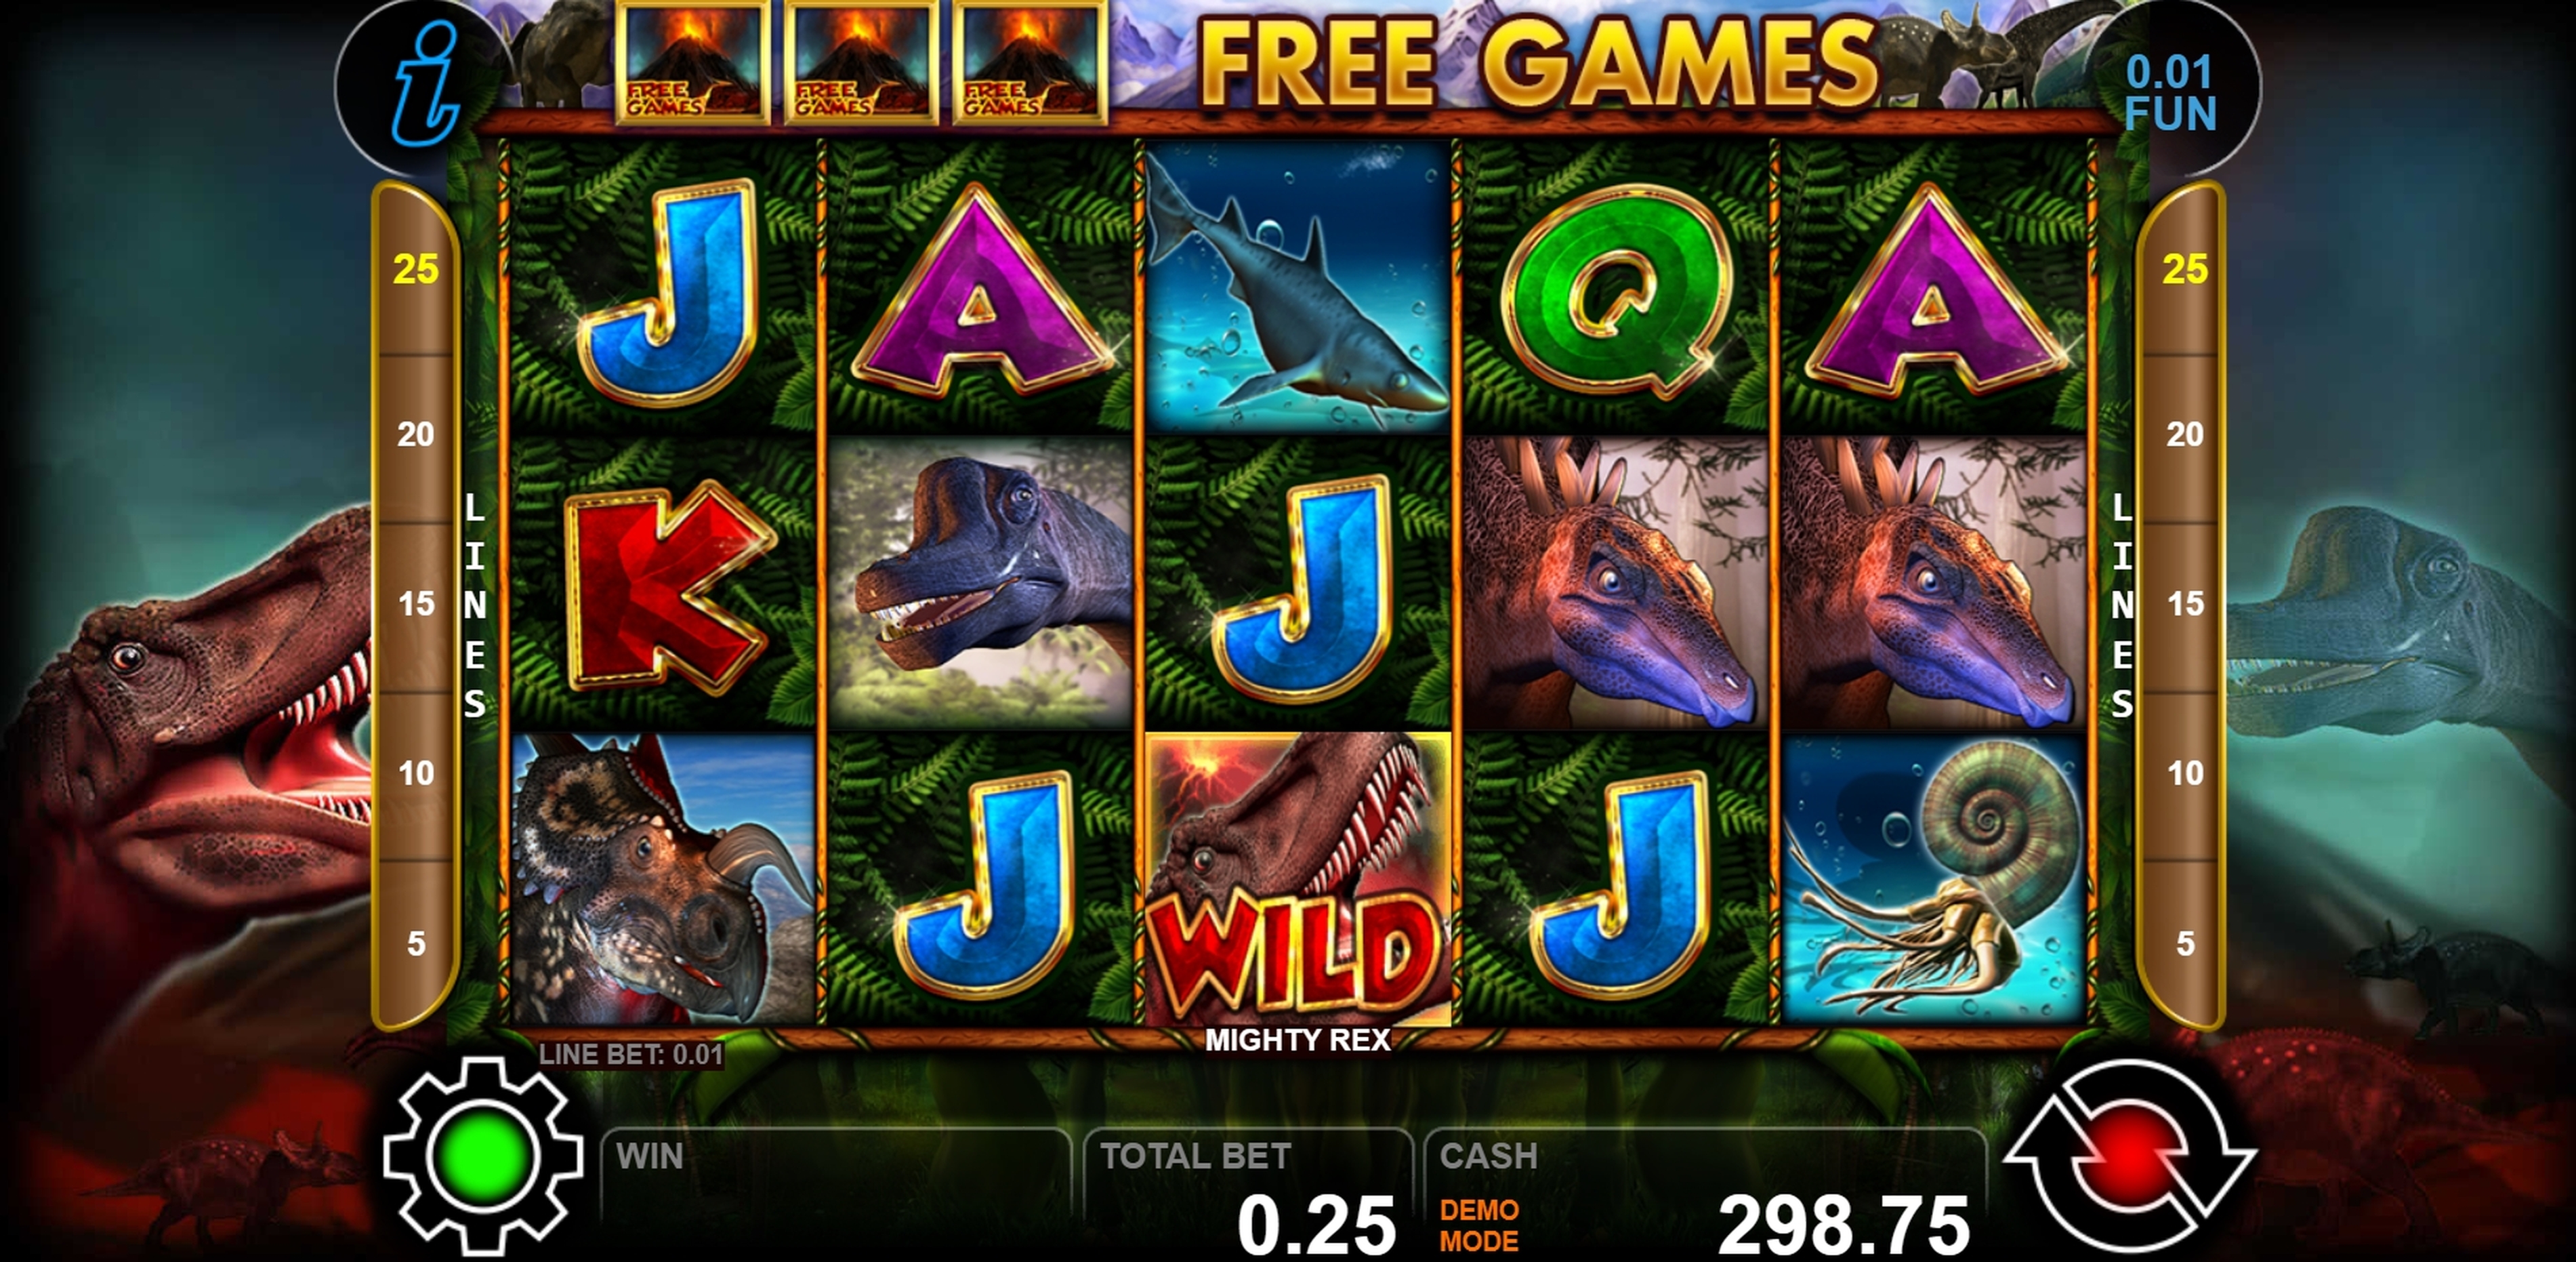 Win Money in Mighty Rex Free Slot Game by casino technology